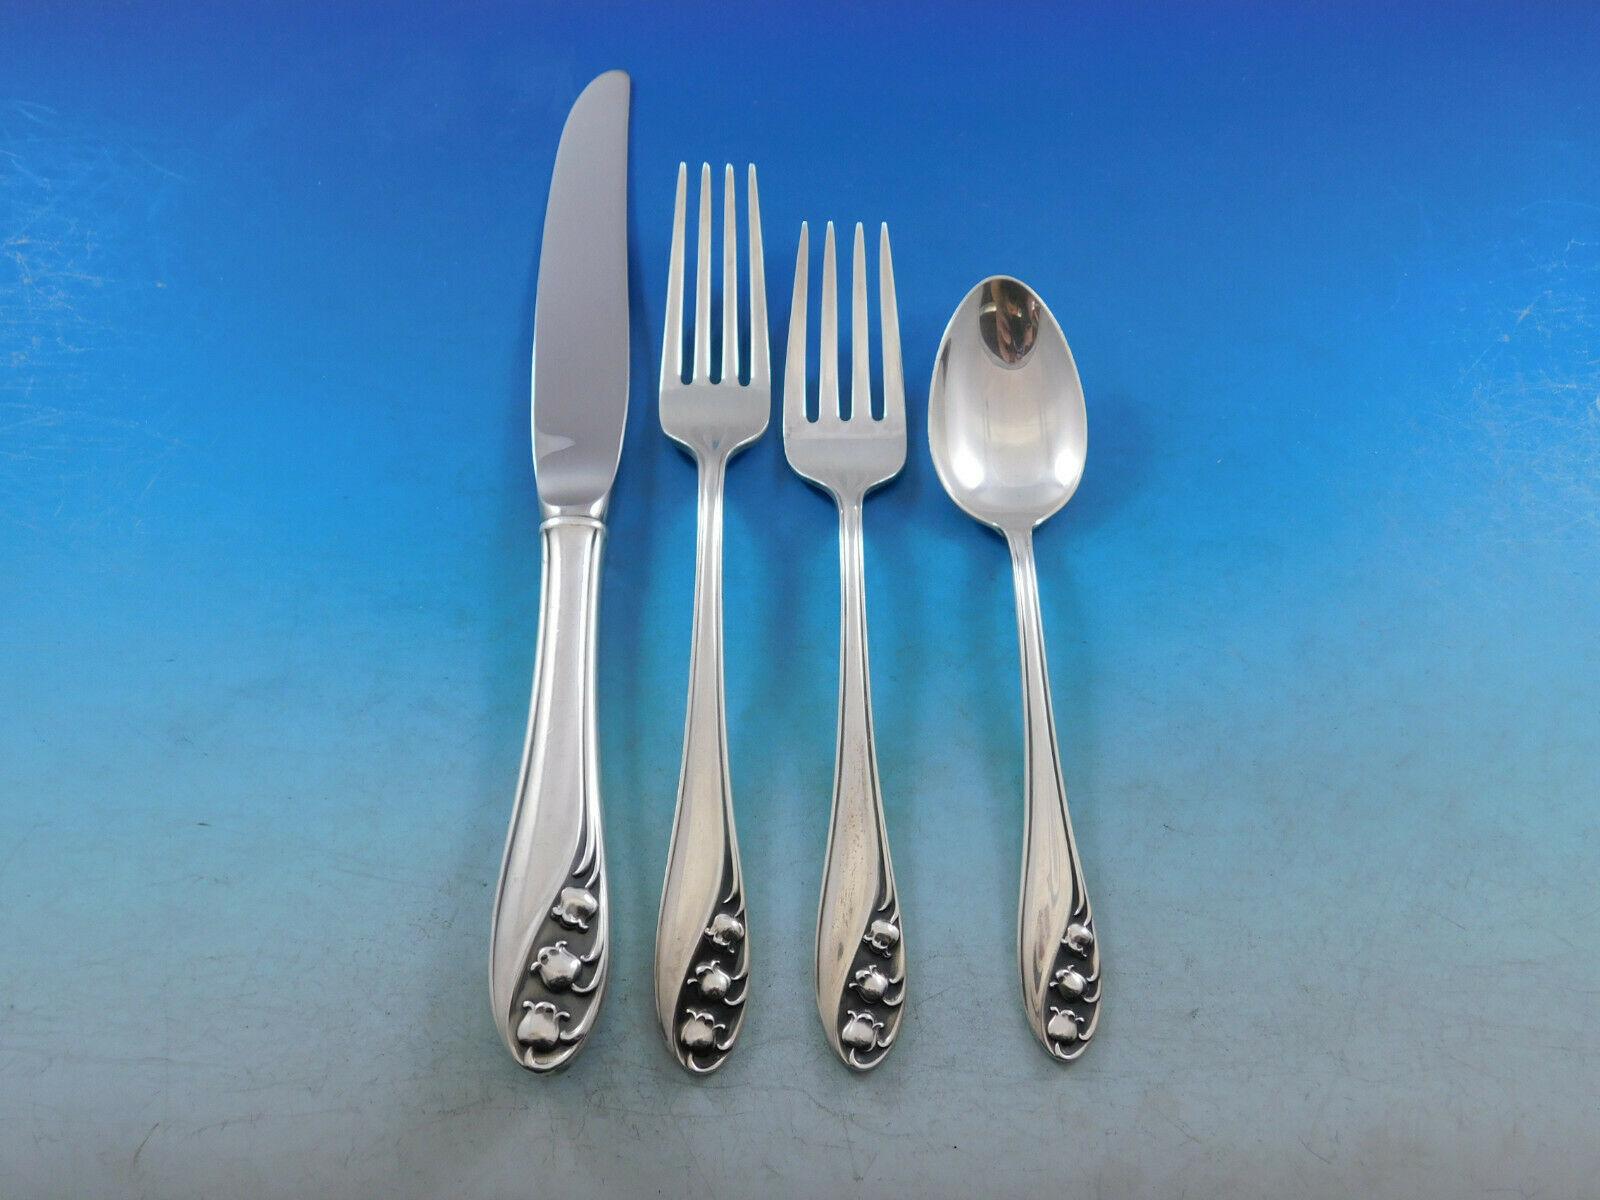 Lily of the valley by Gorham Sterling Silver Flatware set - 64 pieces. This set includes:

8 Knives, 8 7/8